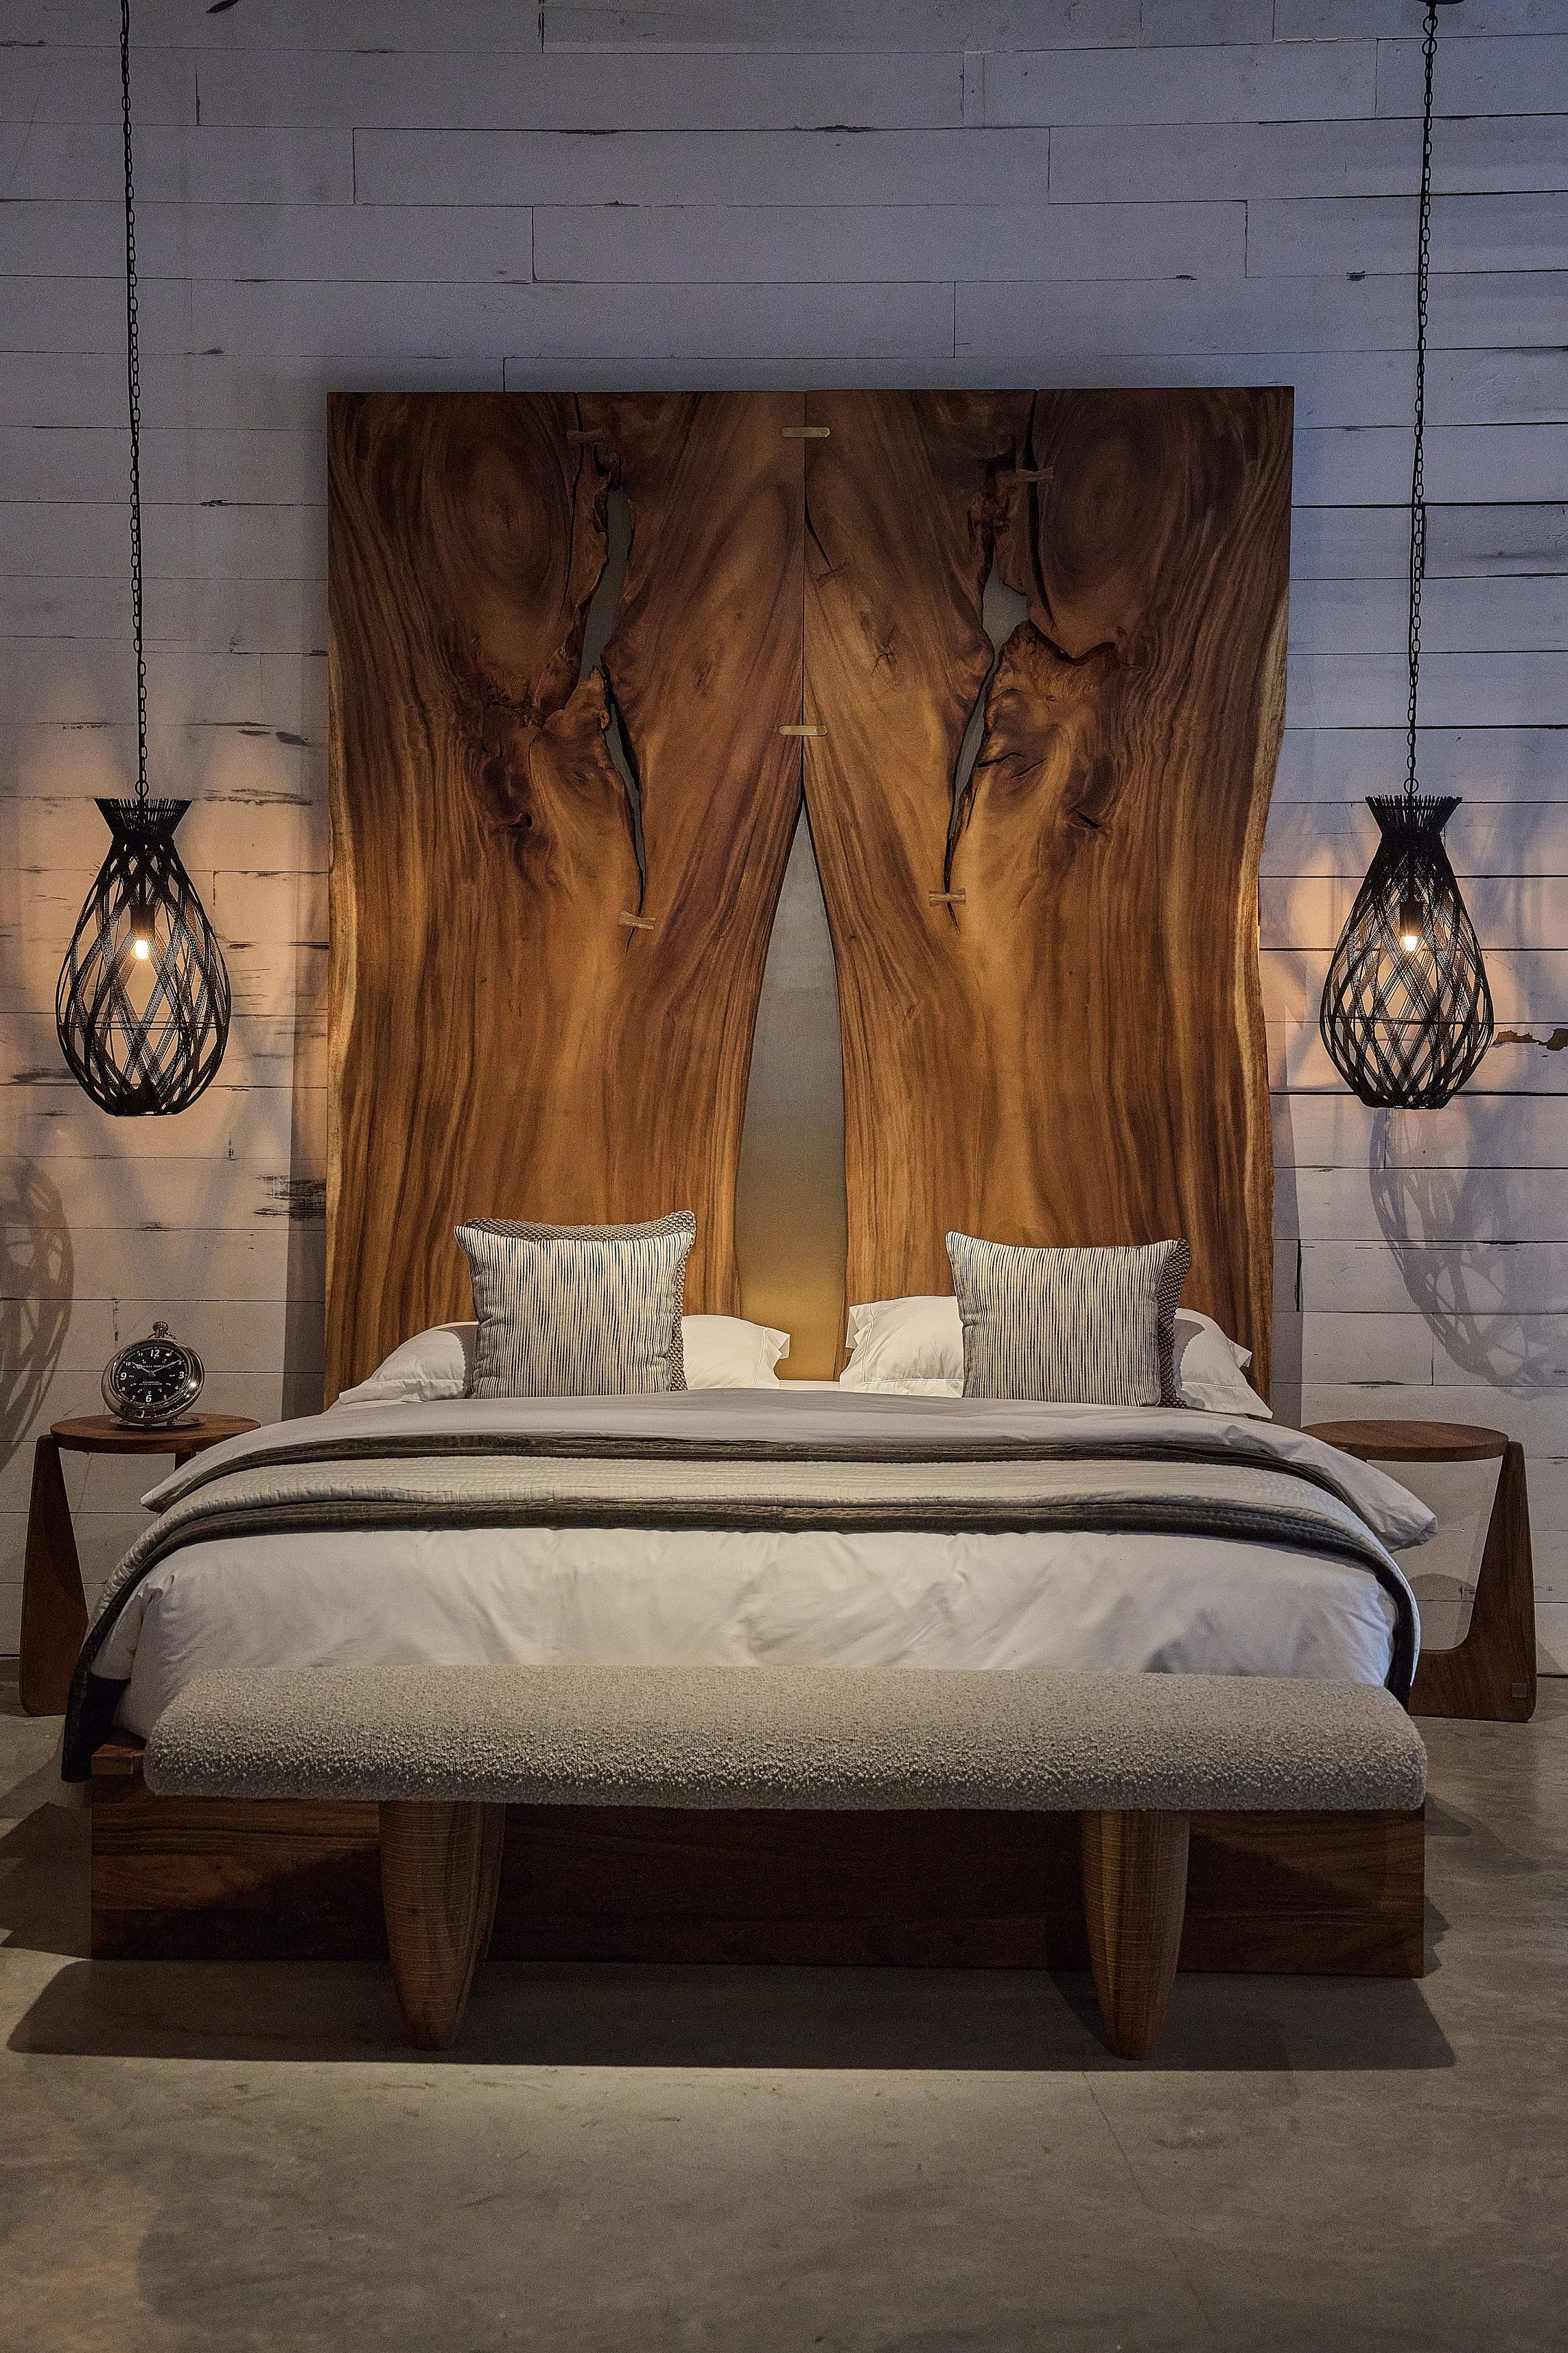 A bed with a huge wooden headboard sits alongside two pendant lights hanging from the ceiling, with a bench in front.